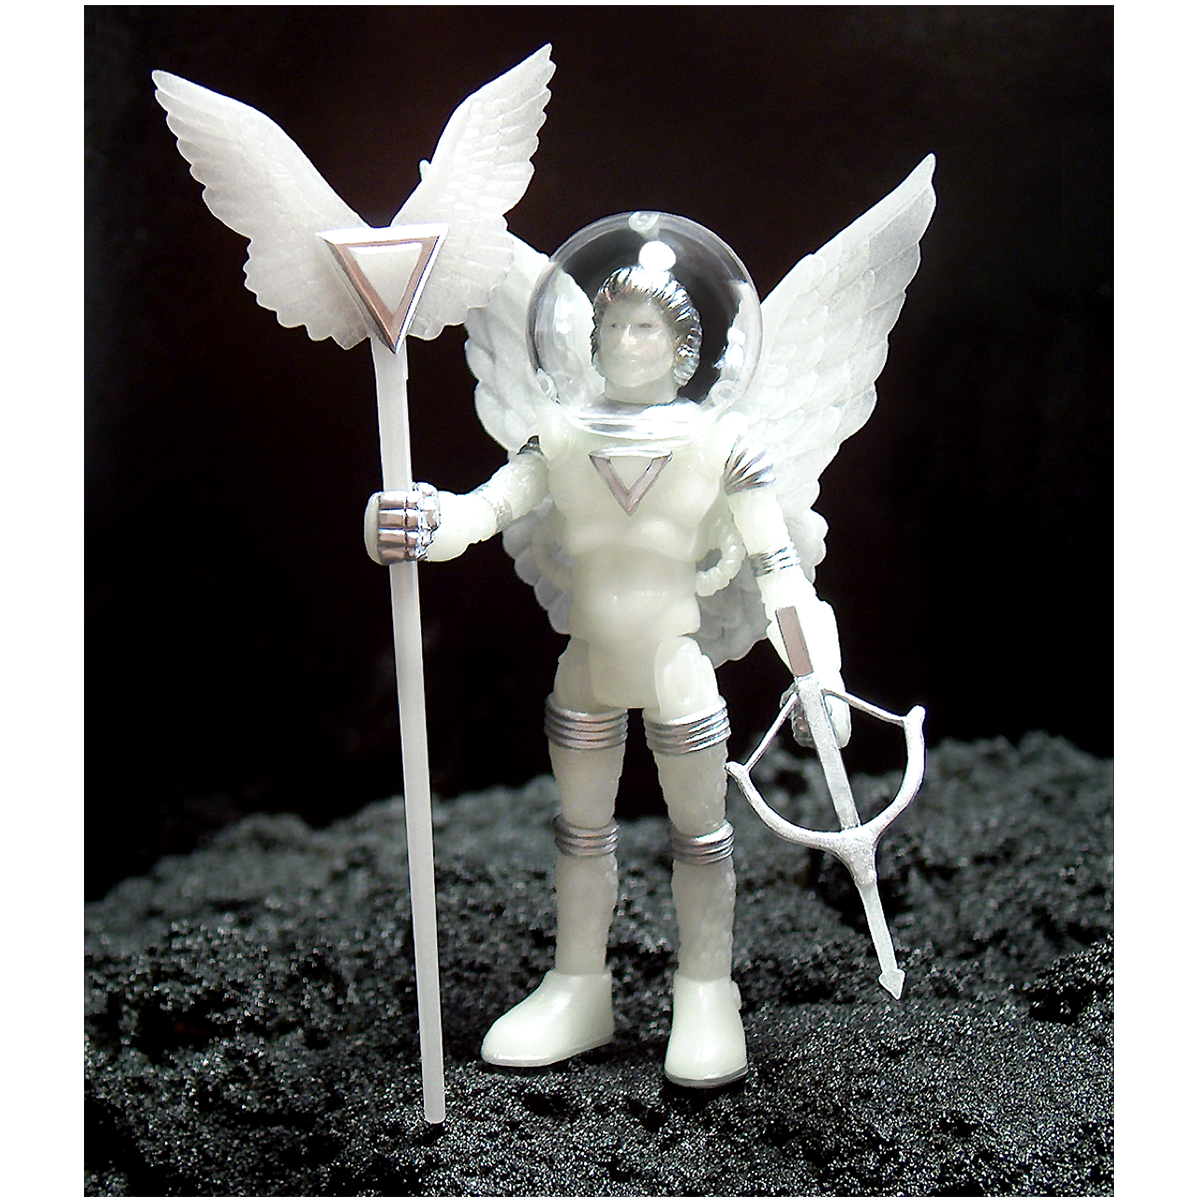 A white COMMANDER COMET COSMIC RADIATION action figure with wings and a spear.